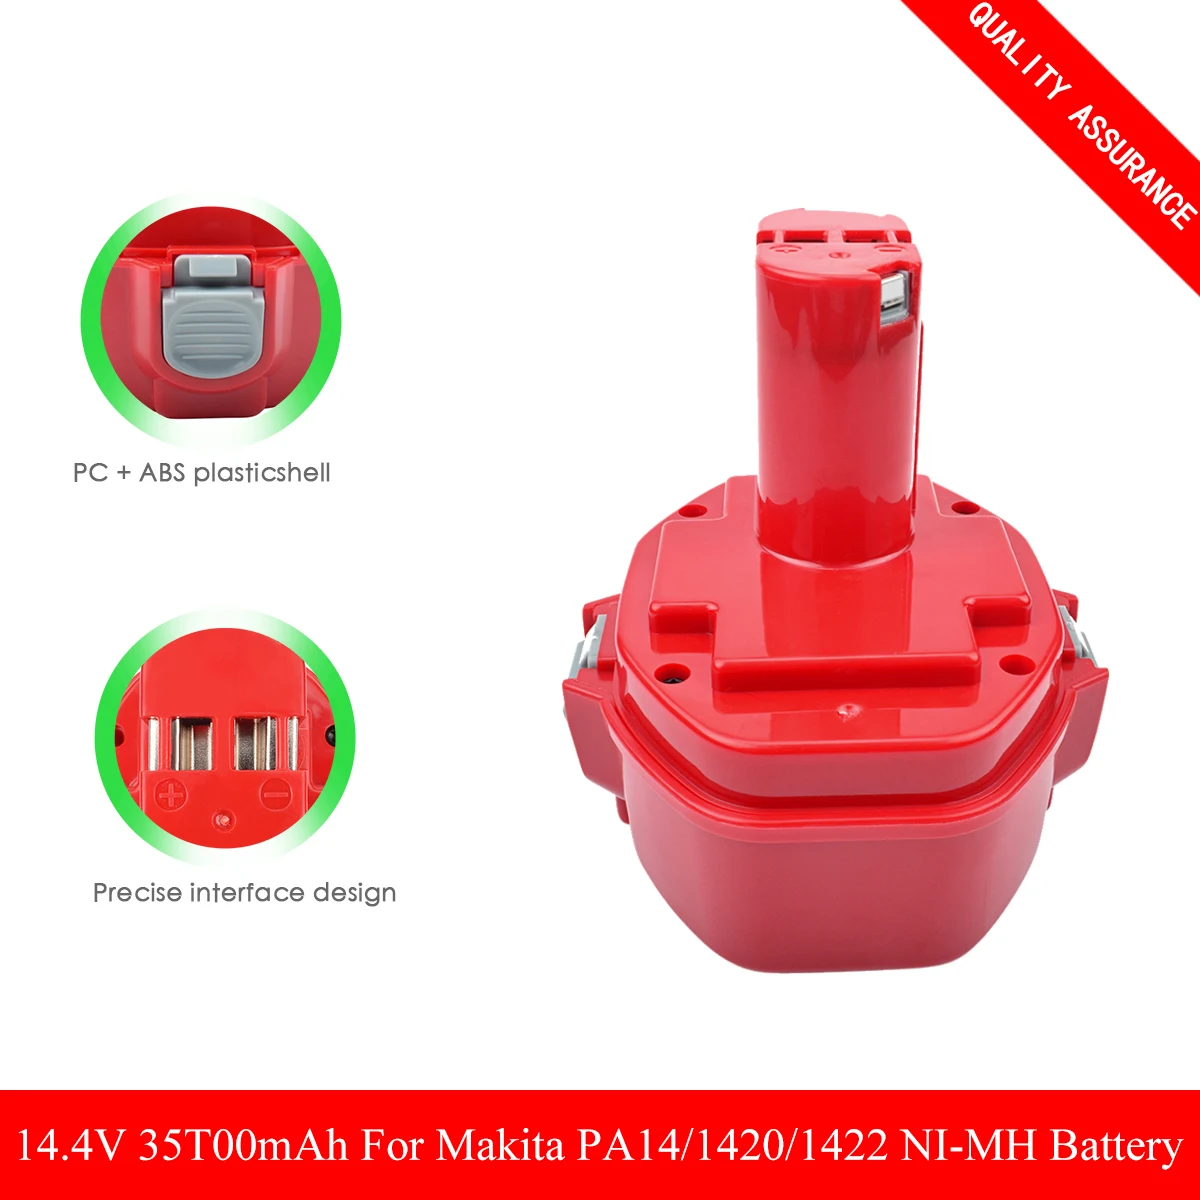 

NEW PA14 Power Tools Rechargeable Battery 3.5Ah NI-MH for Makita 14.4V Cordless Drills screwdriver Battery 1420 1433 1434